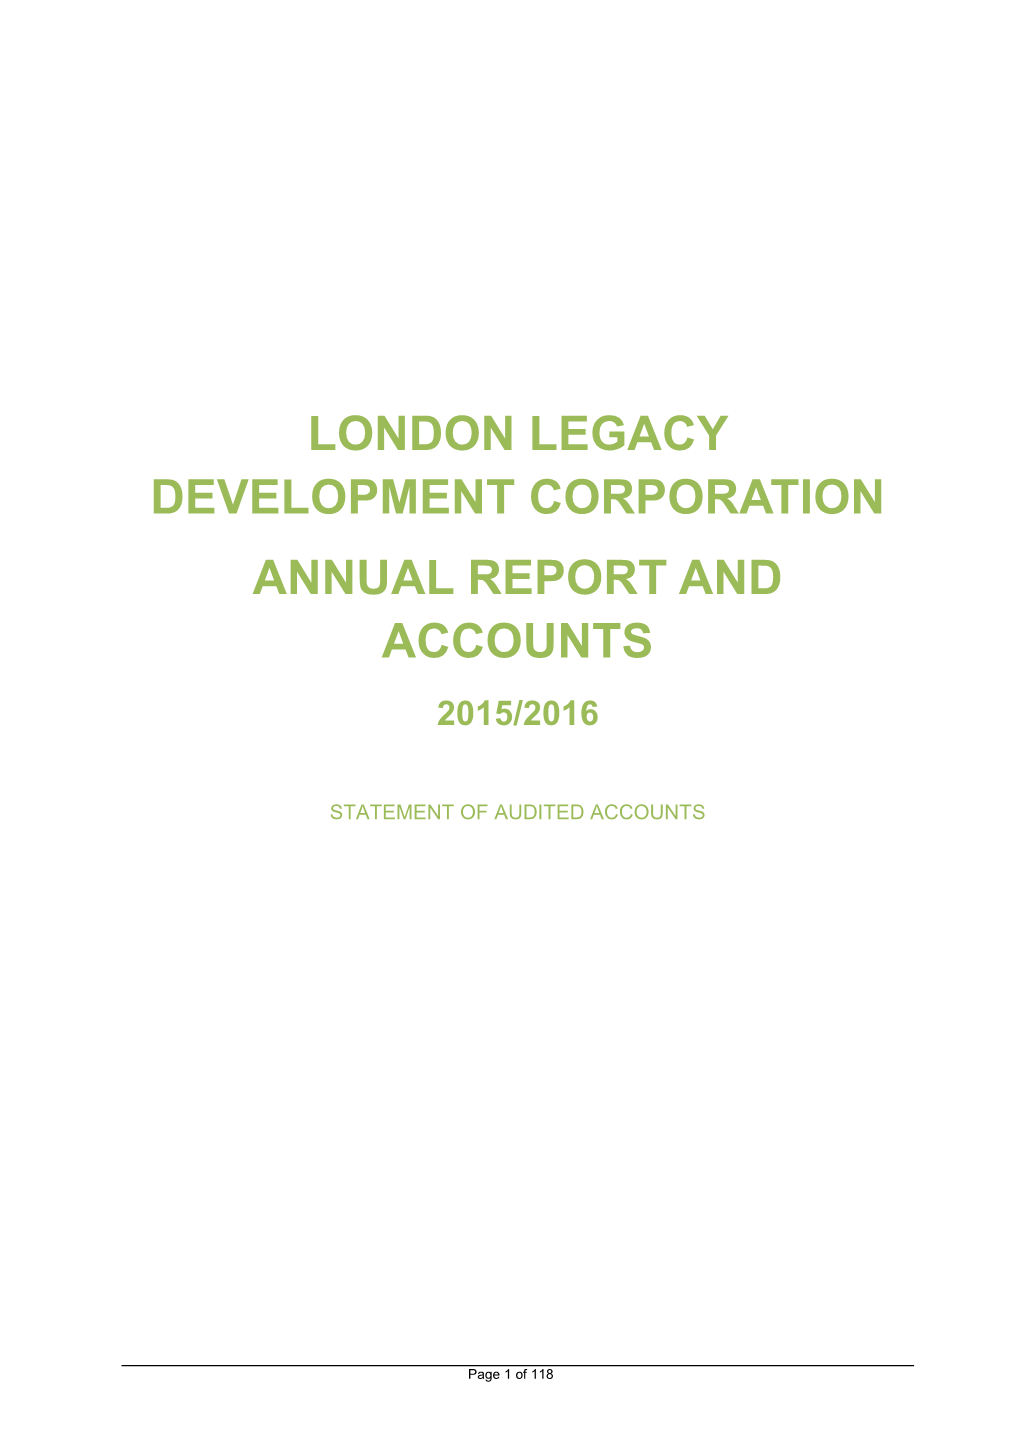 London Legacy Development Corporation Annual Report and Accounts 2015/2016